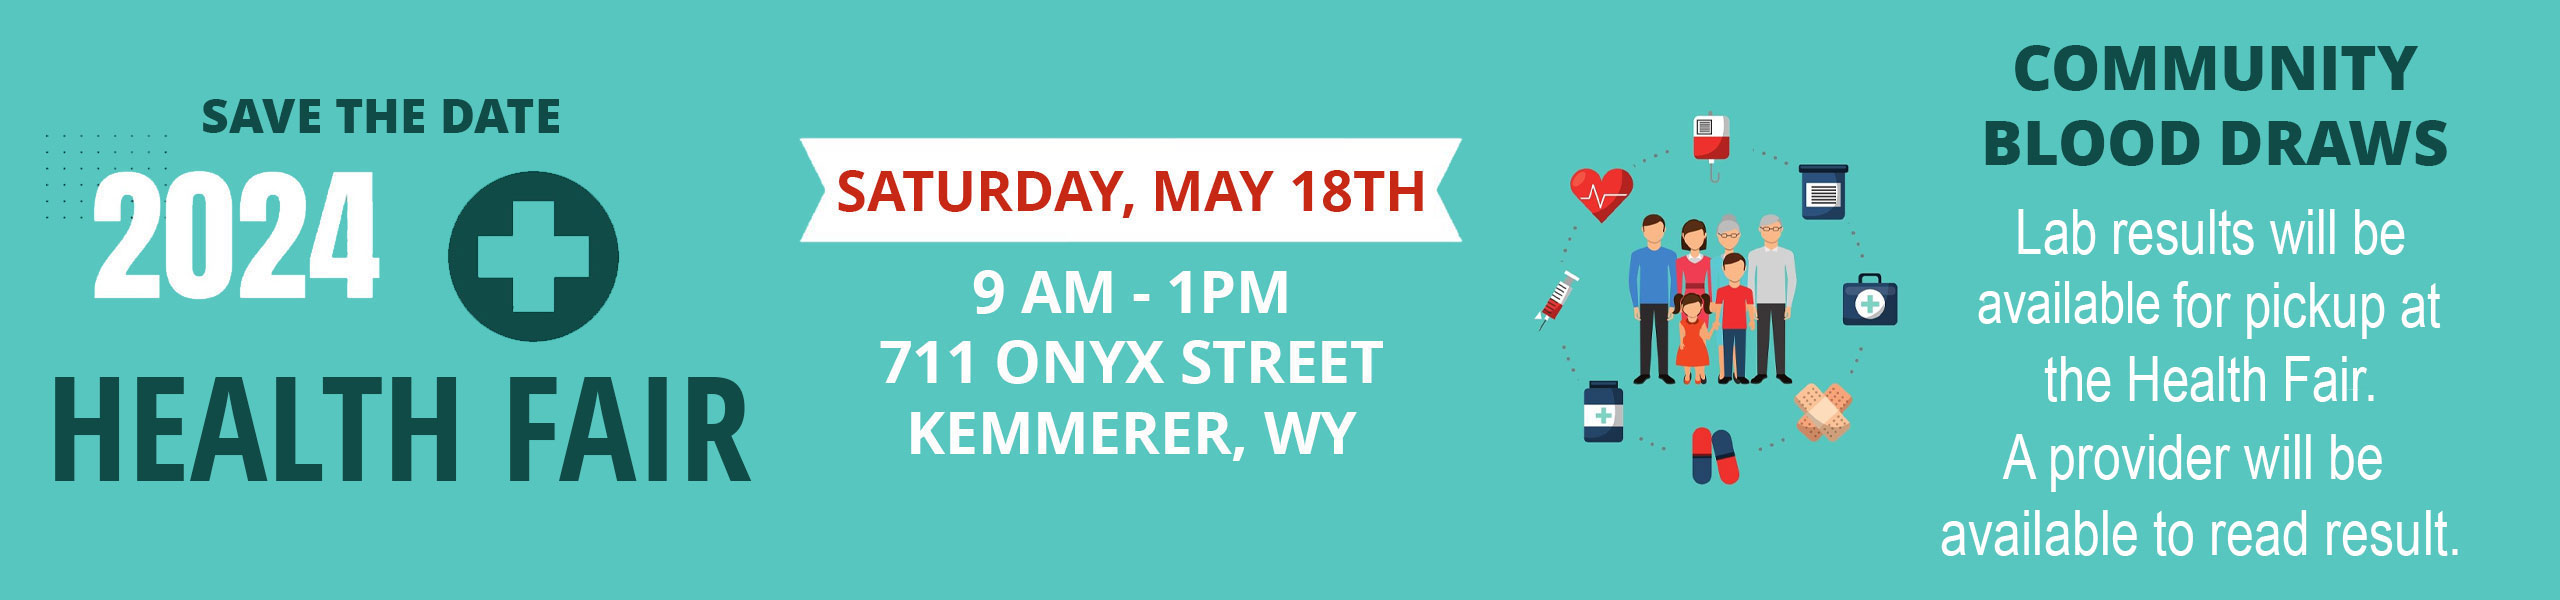 Save the Date 

2024 Health Fair 

Saturday, May 18th 

9am - 1pm
711 Onyx Street 
Kemmerer, WY

Community Blood Draws 
Tuesday - Friday 
April 30th - May 3
6am - 11am

EMS building 

Schedule today!